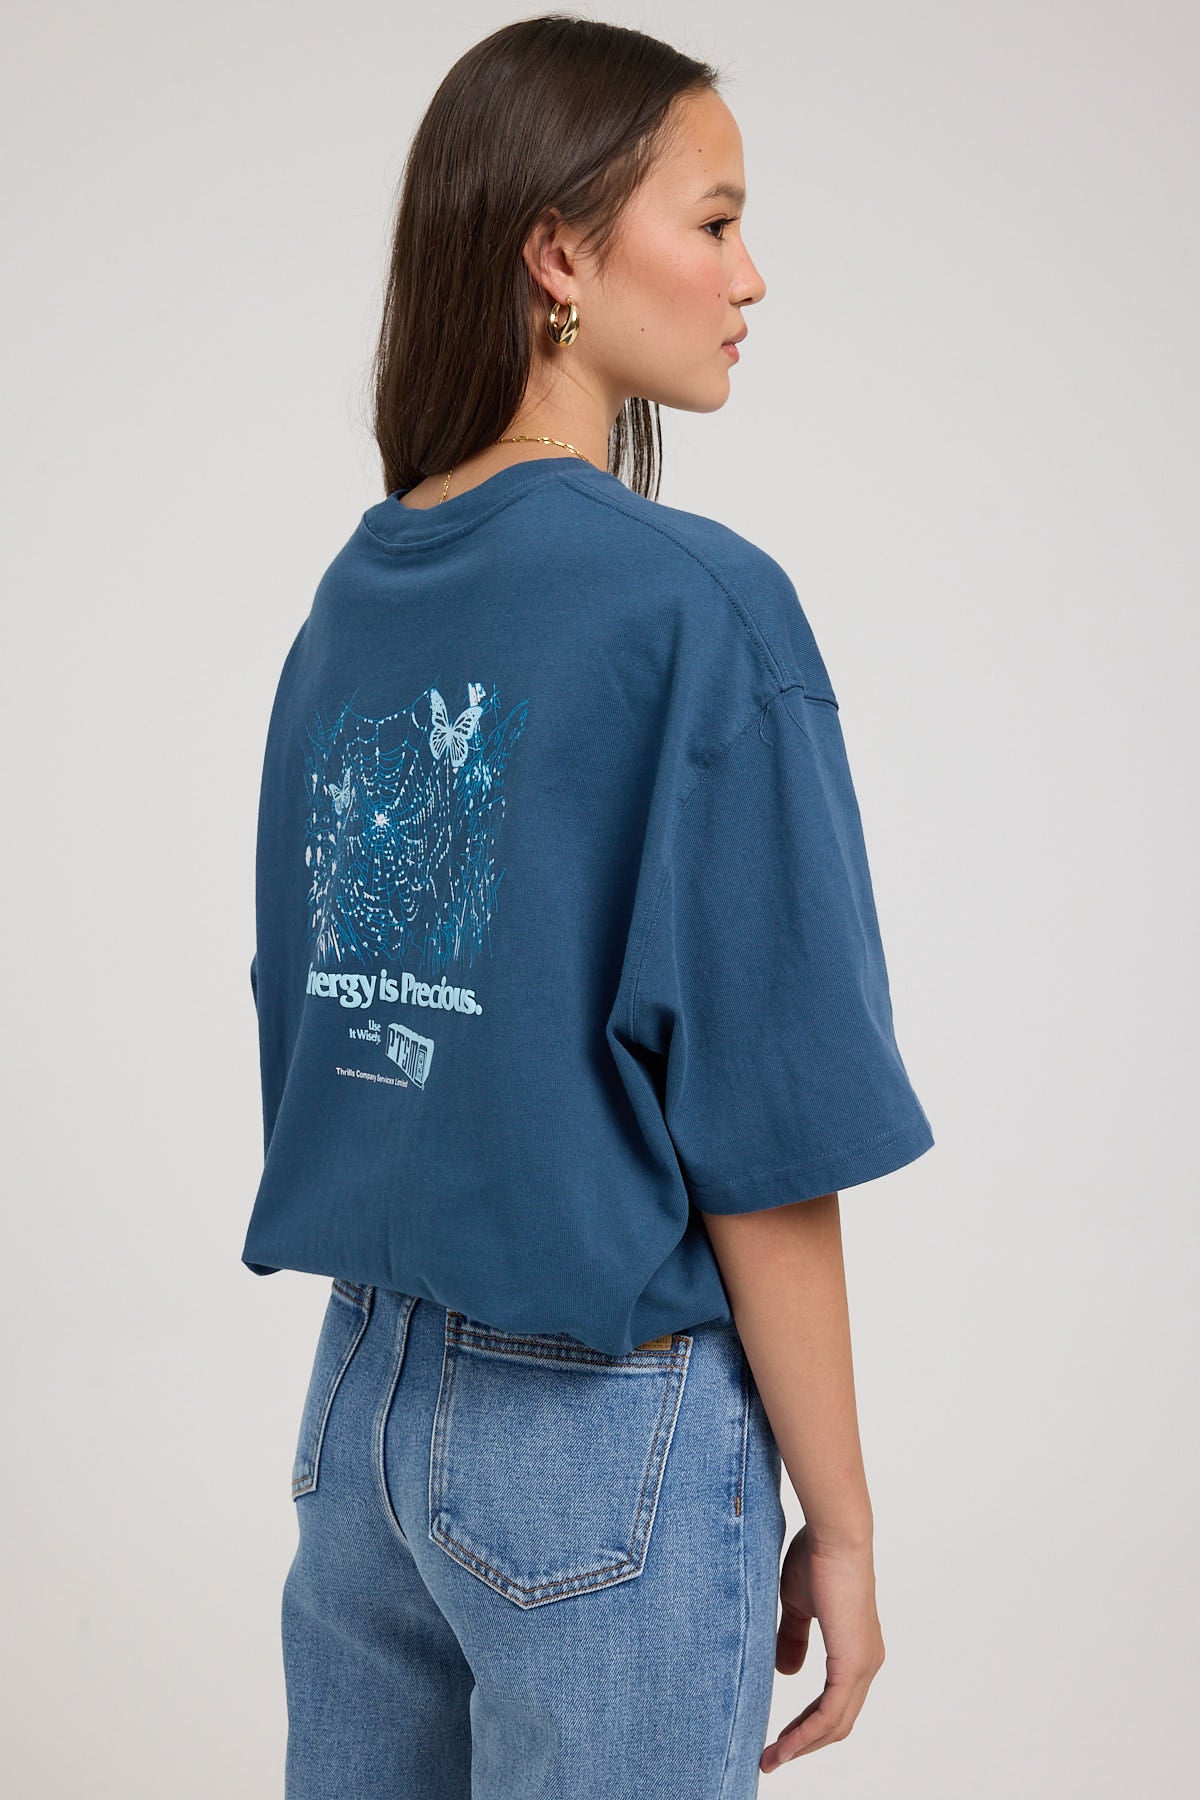 Thrills Energy Is Precious Oversized Tee New Teal